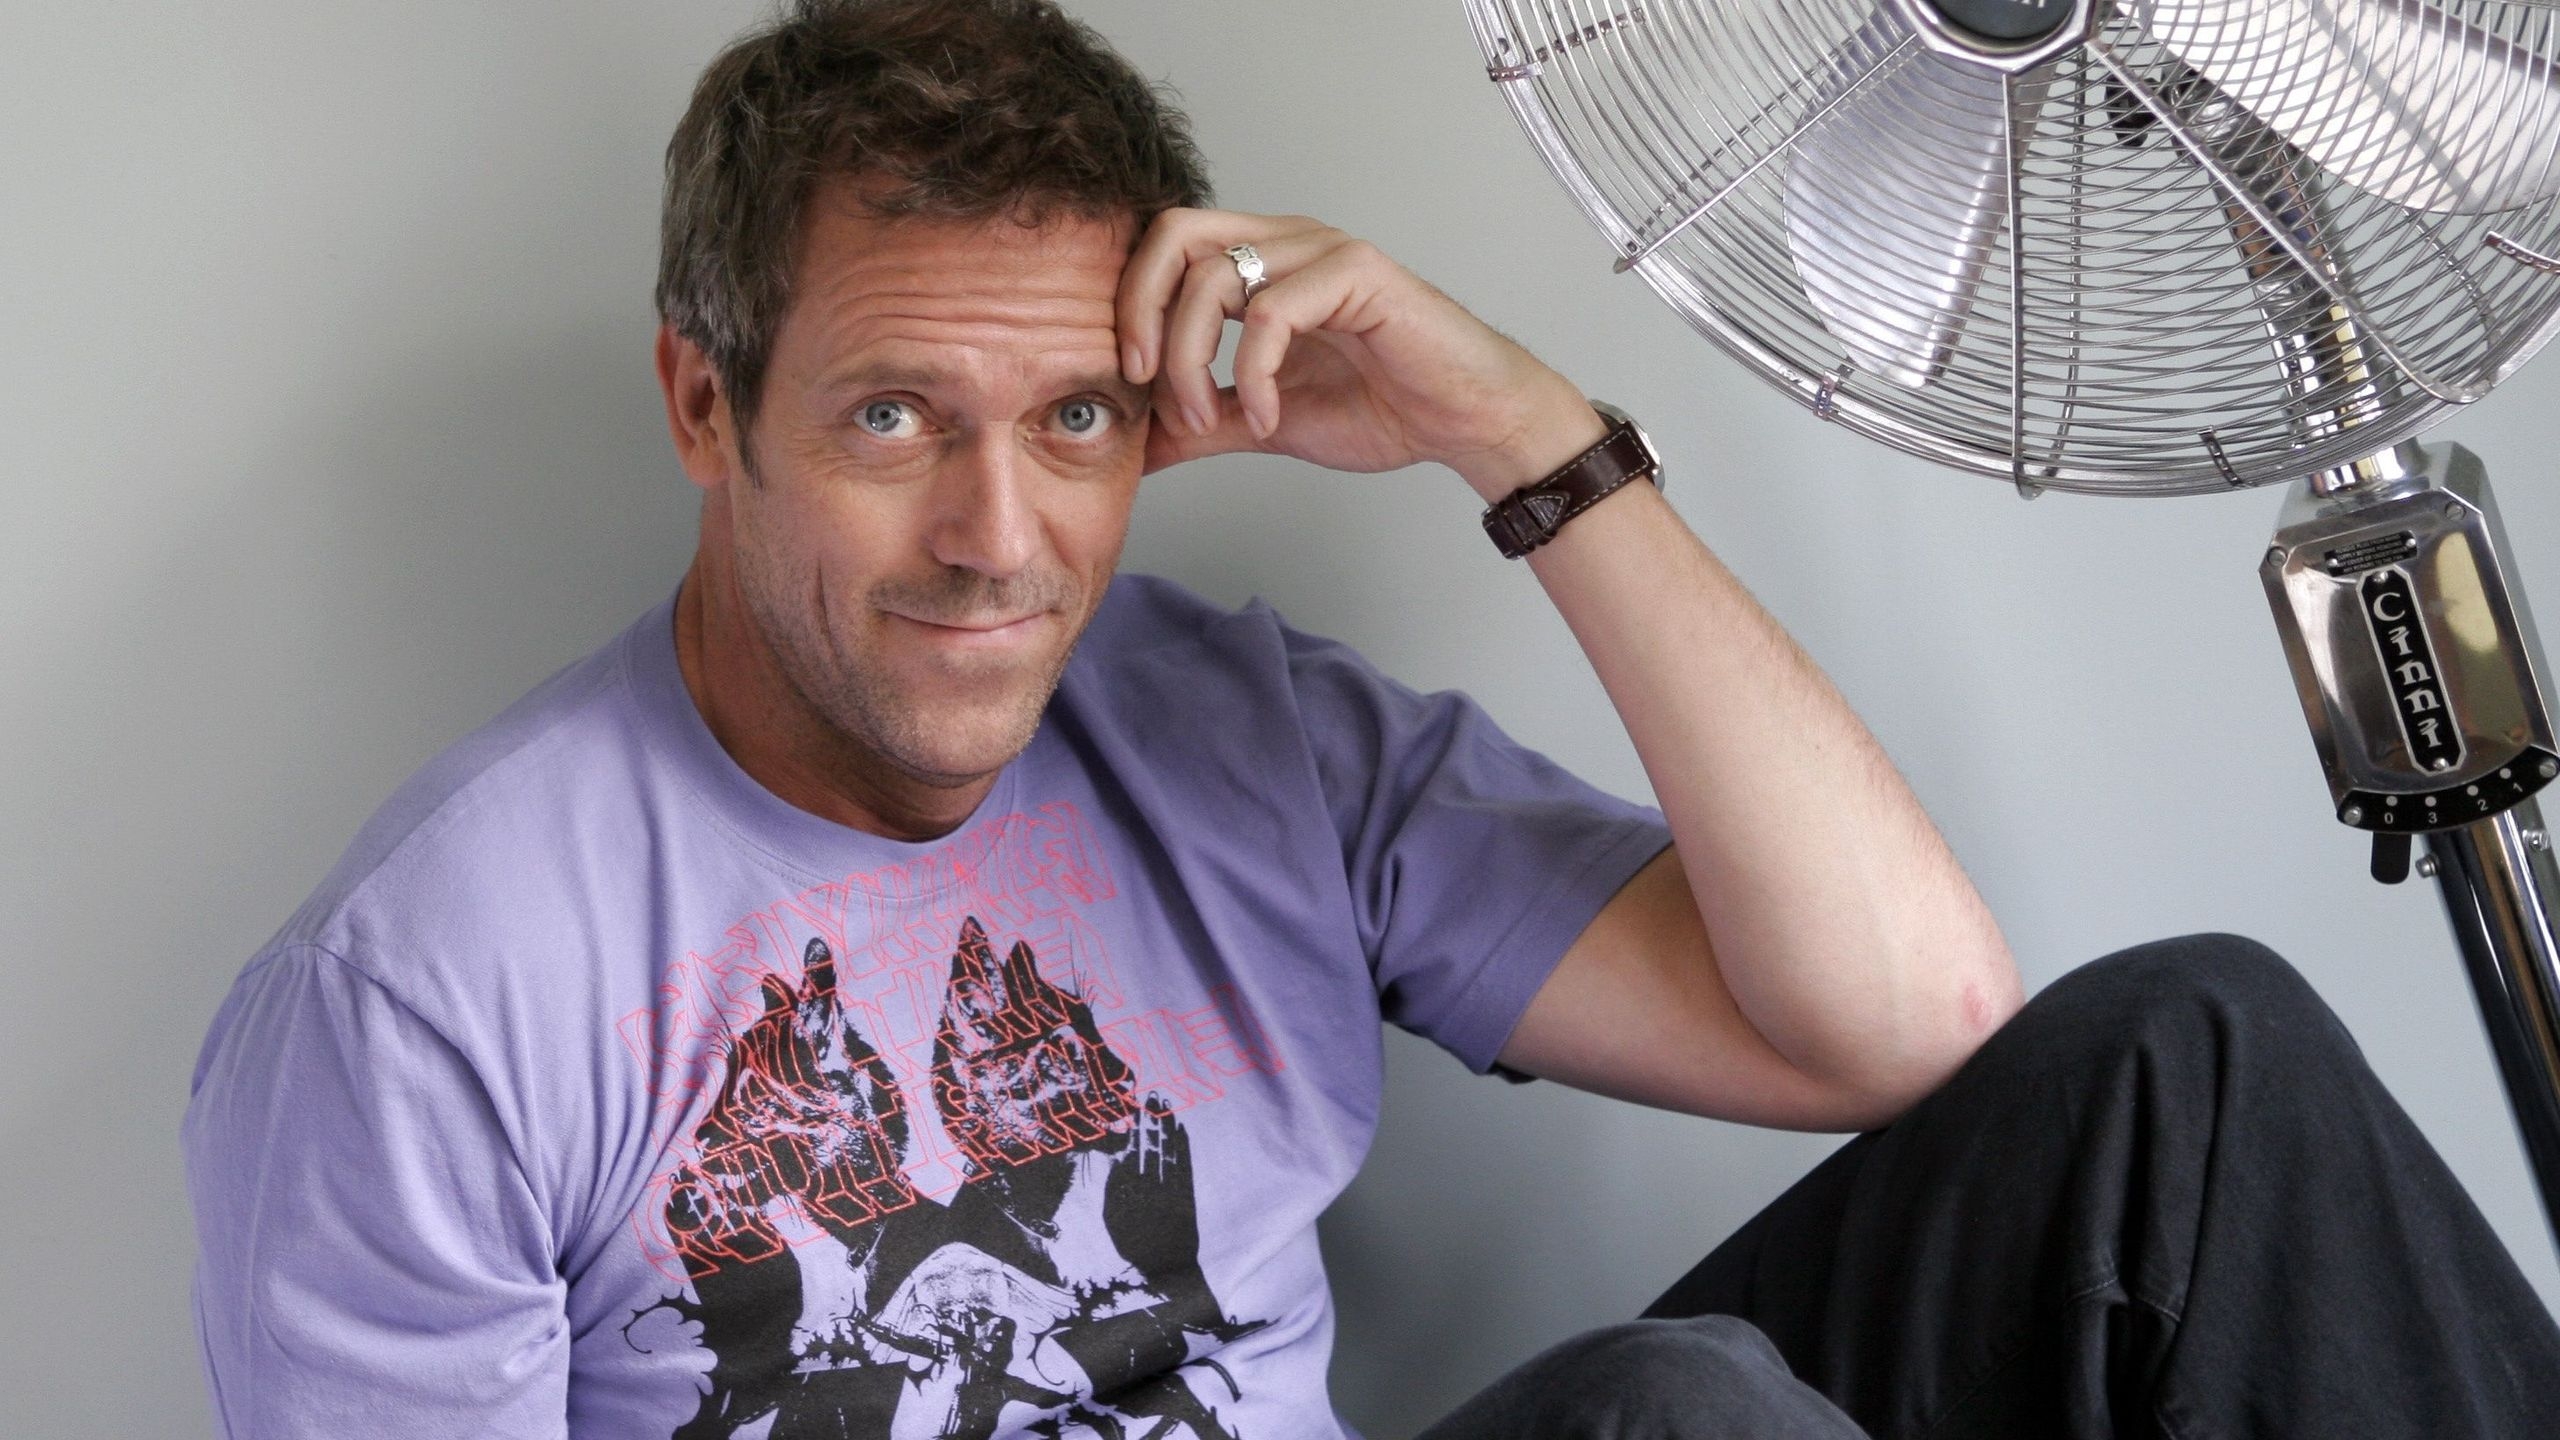 Hugh Laurie for 2560x1440 HDTV resolution